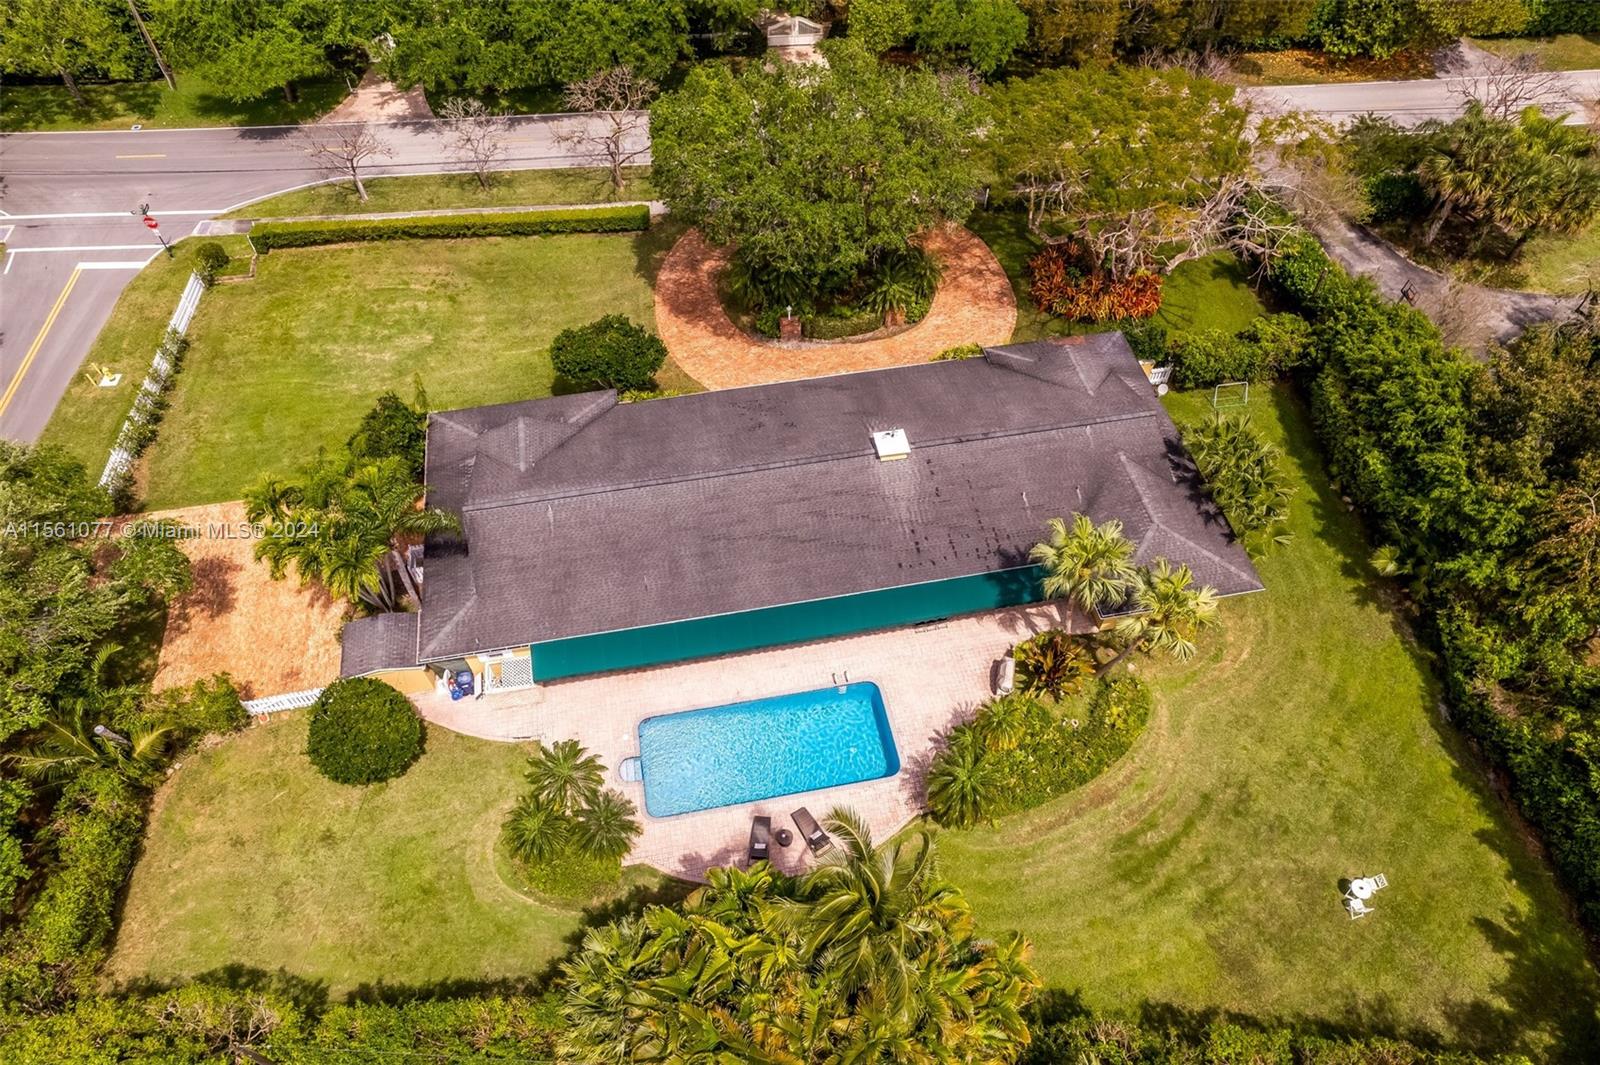 The perfect family home, sitting on an oversized 32,000+ sf . lot in the heart of Pinecrest. You'll be greeted by an open floor plan that seamlessly connects the family, living, dining, & kitchen areas. This home combines comfort, & functionality with generous room sizes, expansive views, & access to the backyard/pool area & large covered terrace. Grand-sized living & formal dining room with marble floors. Oversized office or studio with an independent entrance & Chicago brick driveway. Chef's kitchen with large breakfast area. New A/C in 2023. Impact doors and windows bring abundant natural light in. Rainsoft reverse osmosis water filter for the entire home. Ample storage throughout the house and a spacious storage shed. Ideal location, close to Pinecrest and Palmetto Bay's best Schools.